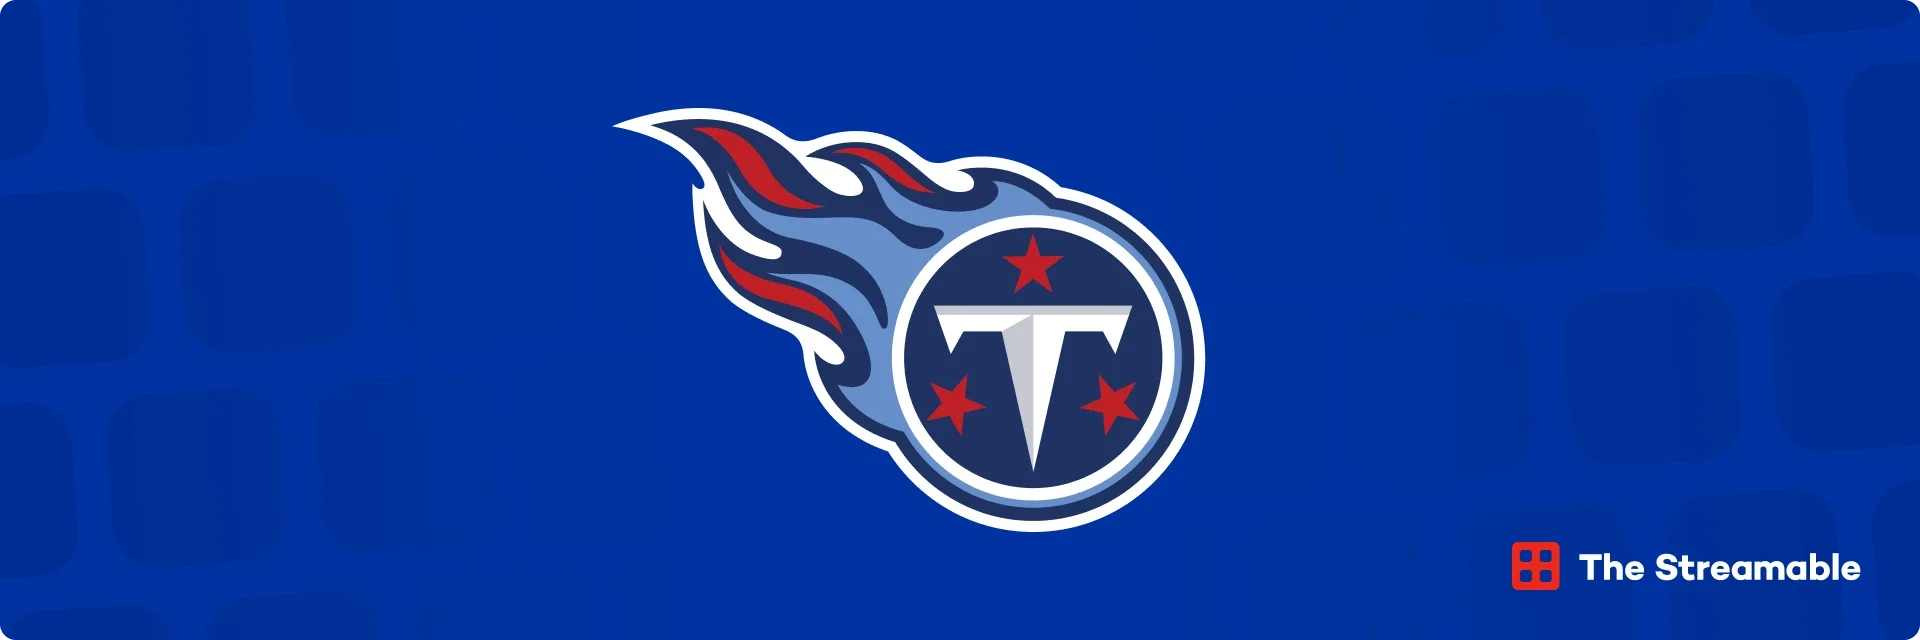 How to Watch Tennessee Titans Games Online Live Without Cable